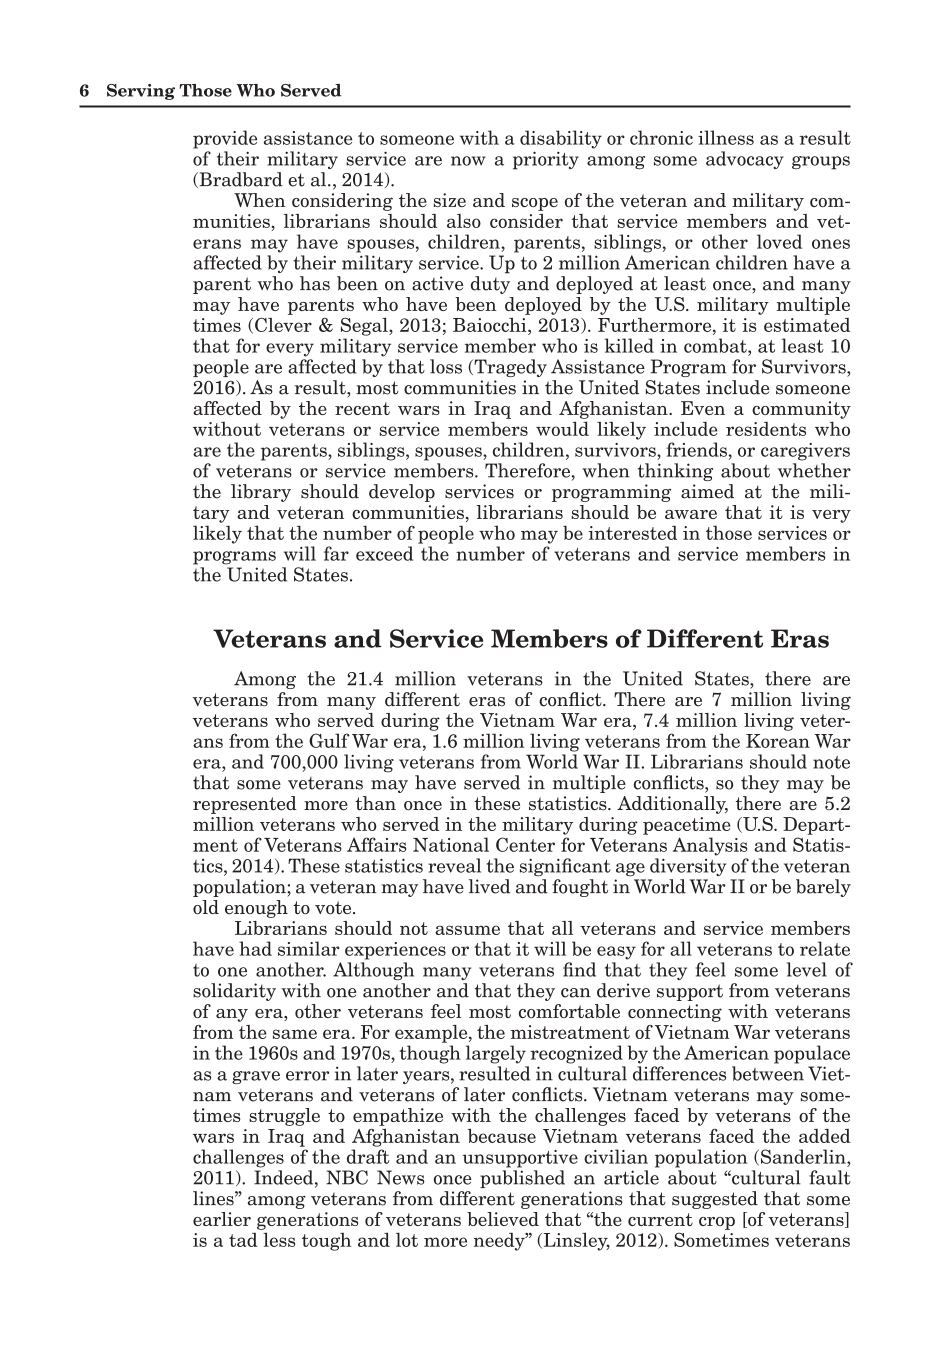 Serving Those Who Served: Librarian's Guide to Working with Veteran and Military Communities page 6